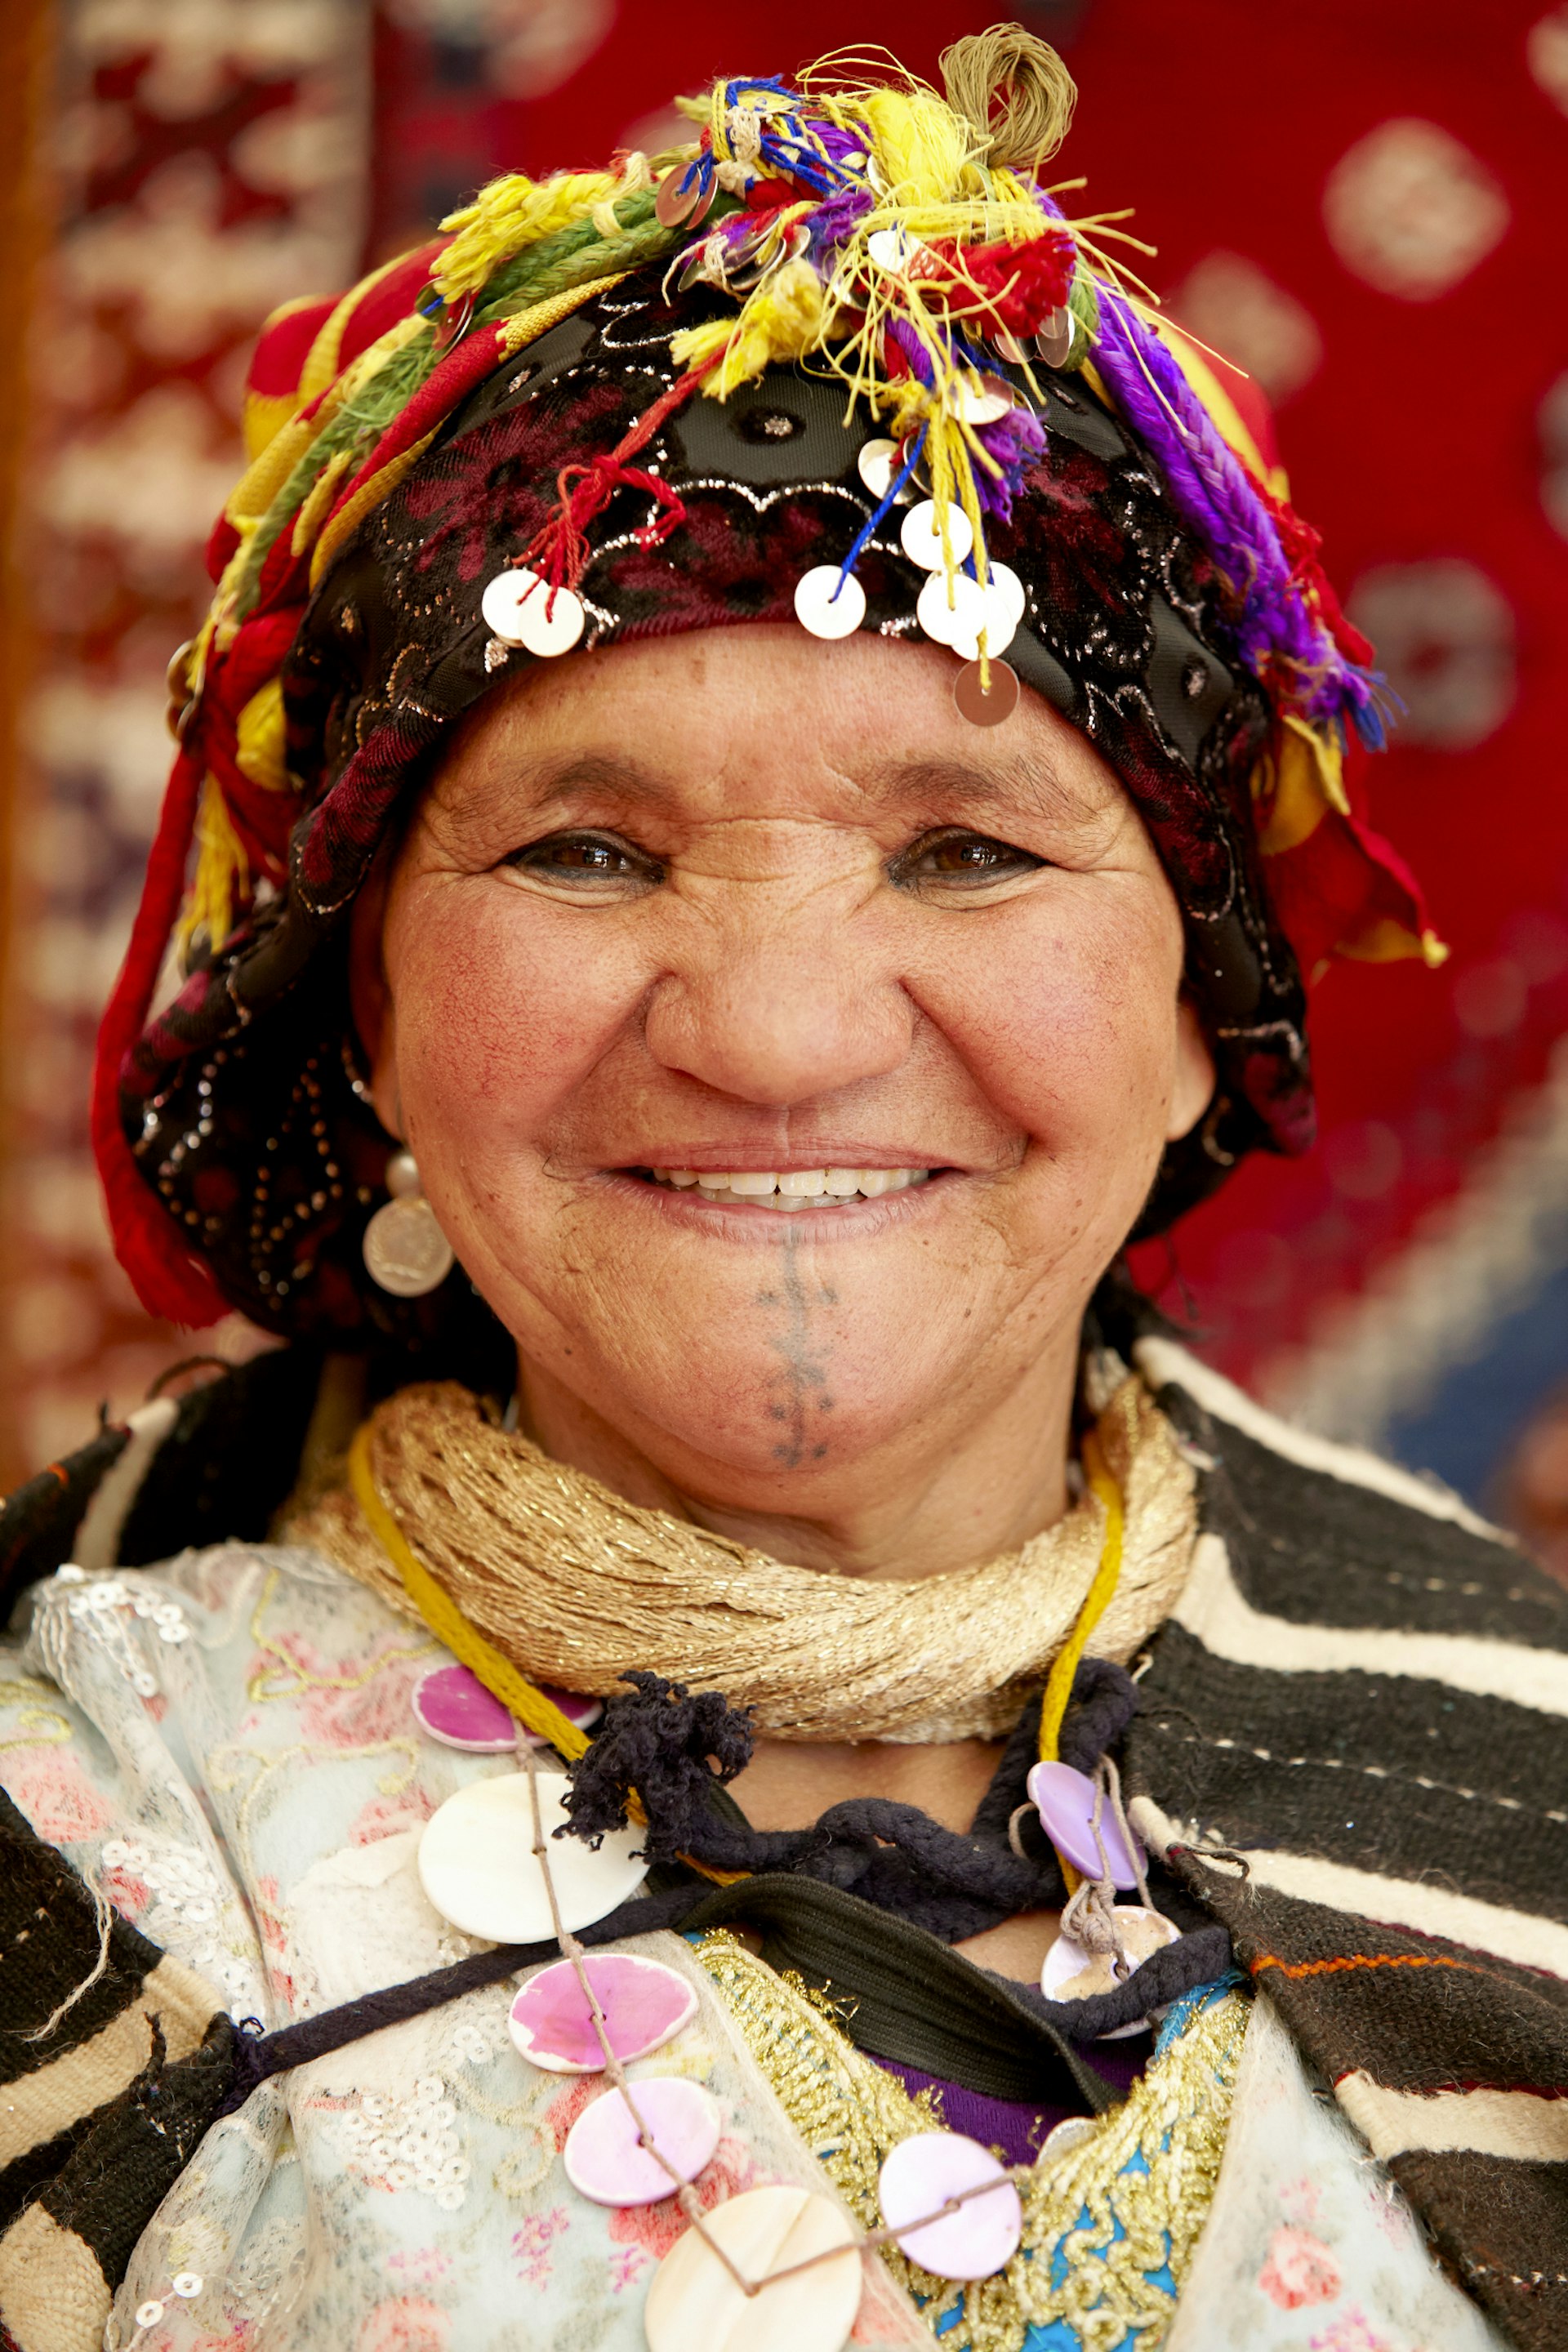 Hannou Amrouch, a prominent figure in rural women's rights in Morocco, wearing traditional Berber costume, at the annual rose festival in Kalaat M'Gouna, Morocco